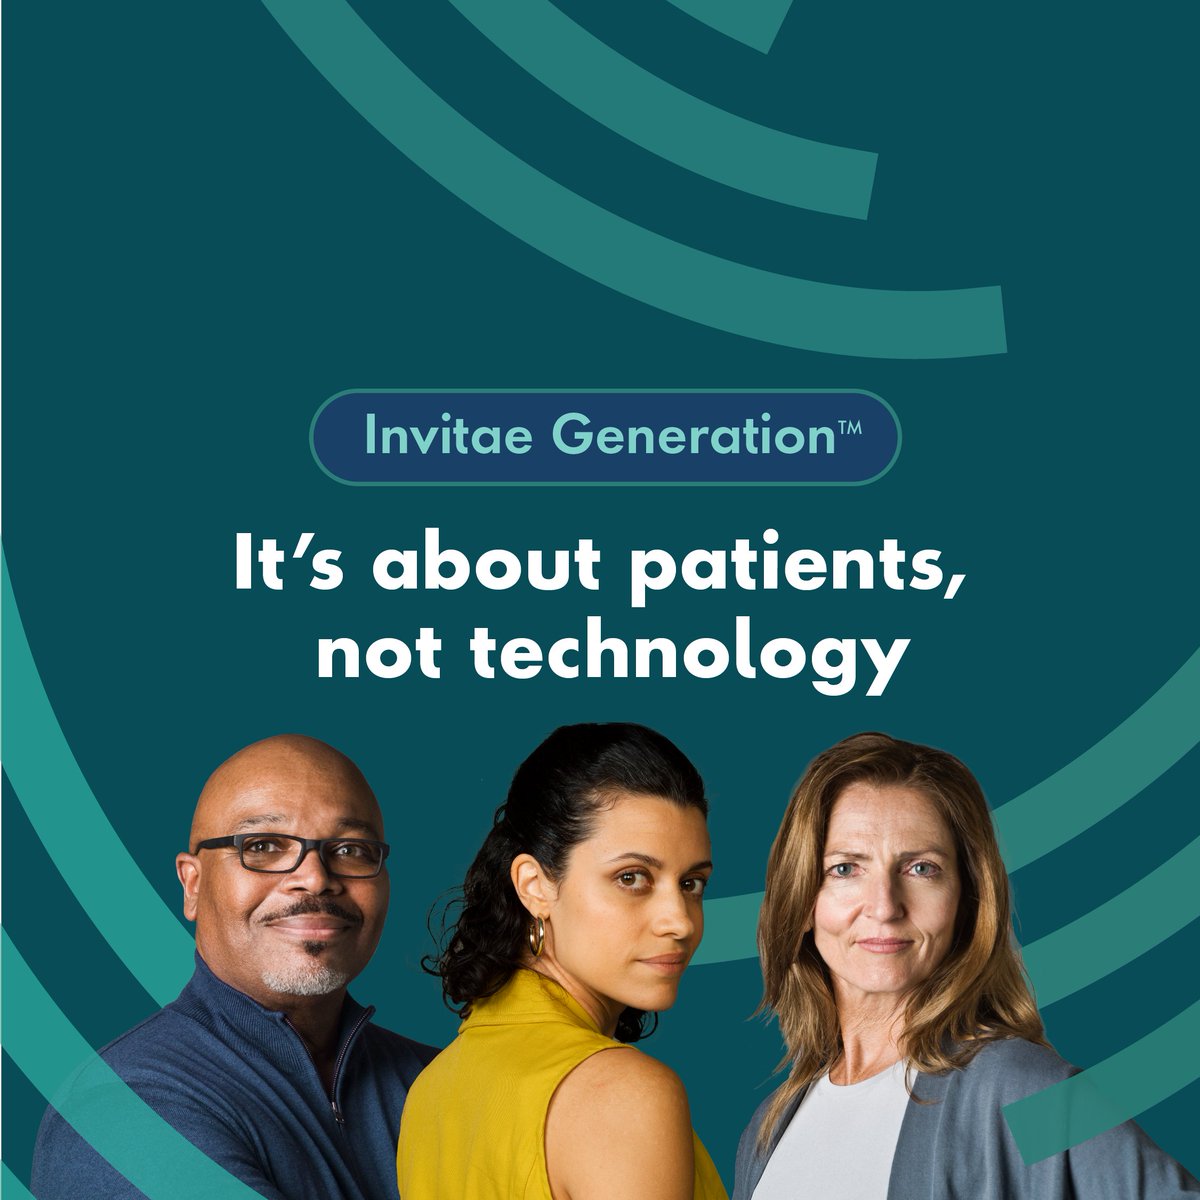 Invitae Generation™ involves scientific experts who tirelessly innovate to get to the truth in variant classification and do what’s right for patients. The team automates the parts of variant classification prone to human error. invit.ae/3vNuSg6 #InvitaeGeneration